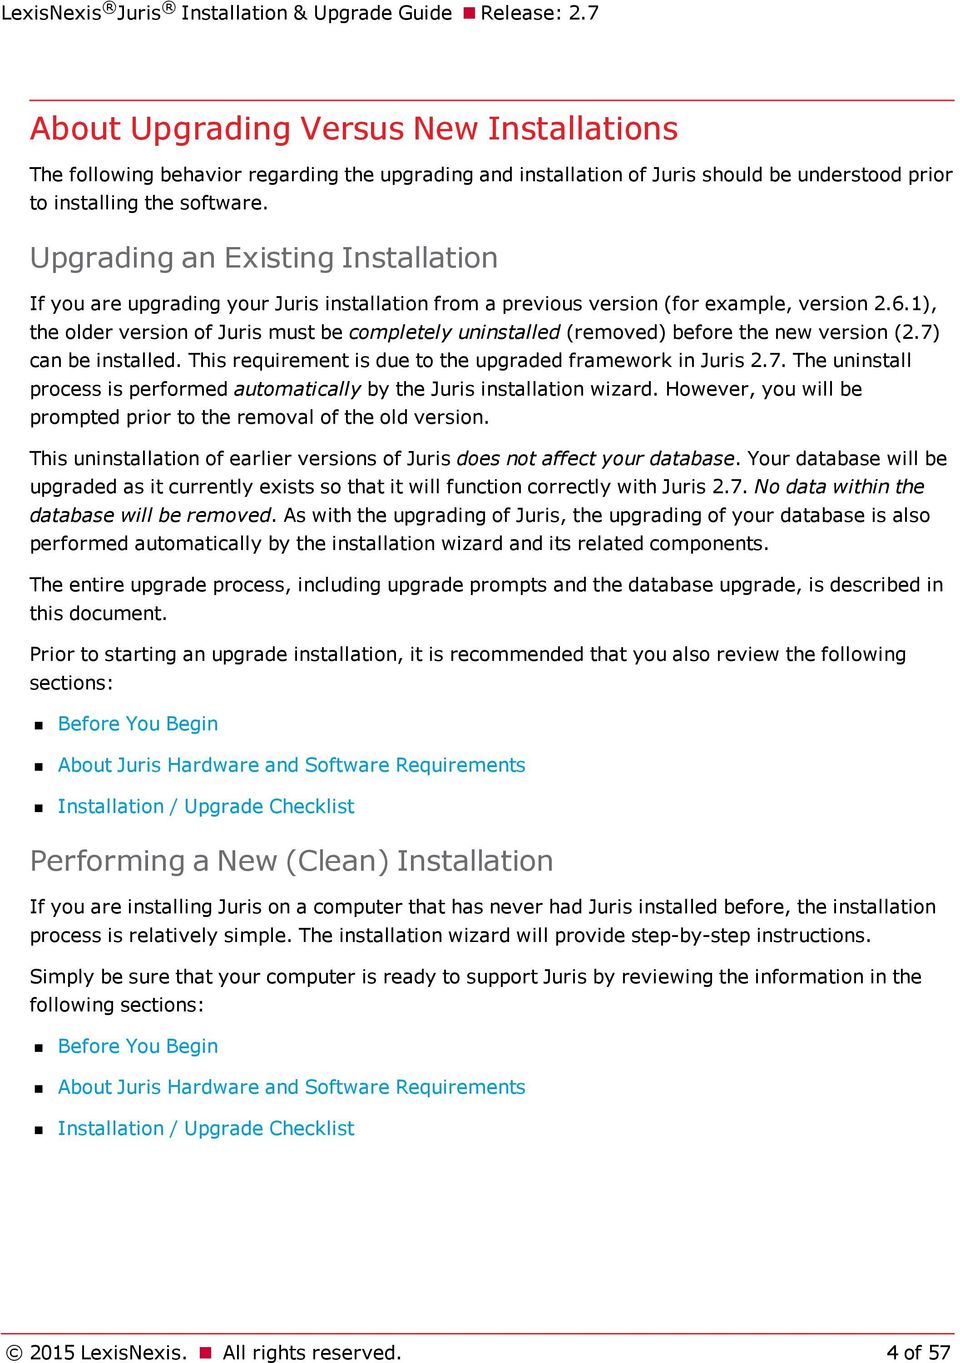 1), the older version of Juris must be completely uninstalled (removed) before the new version (2.7) can be installed. This requirement is due to the upgraded framework in Juris 2.7. The uninstall process is performed automatically by the Juris installation wizard.